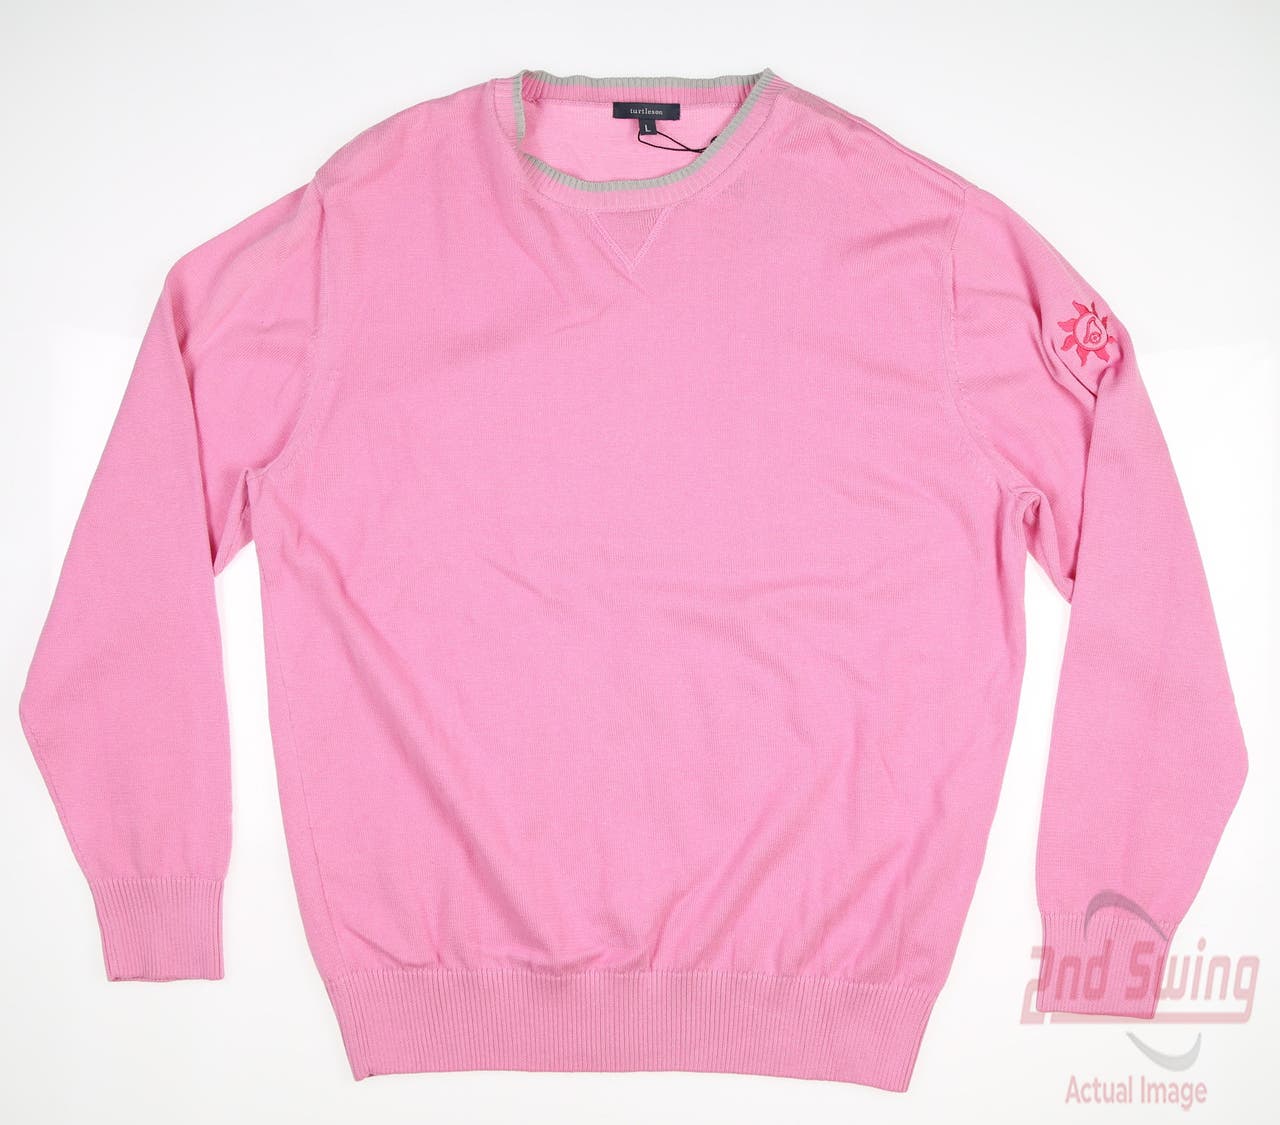 New W/ Logo Mens Turtleson Blount Crewneck Sweater Large L Pink MSRP $185 MF20S03-ORCH